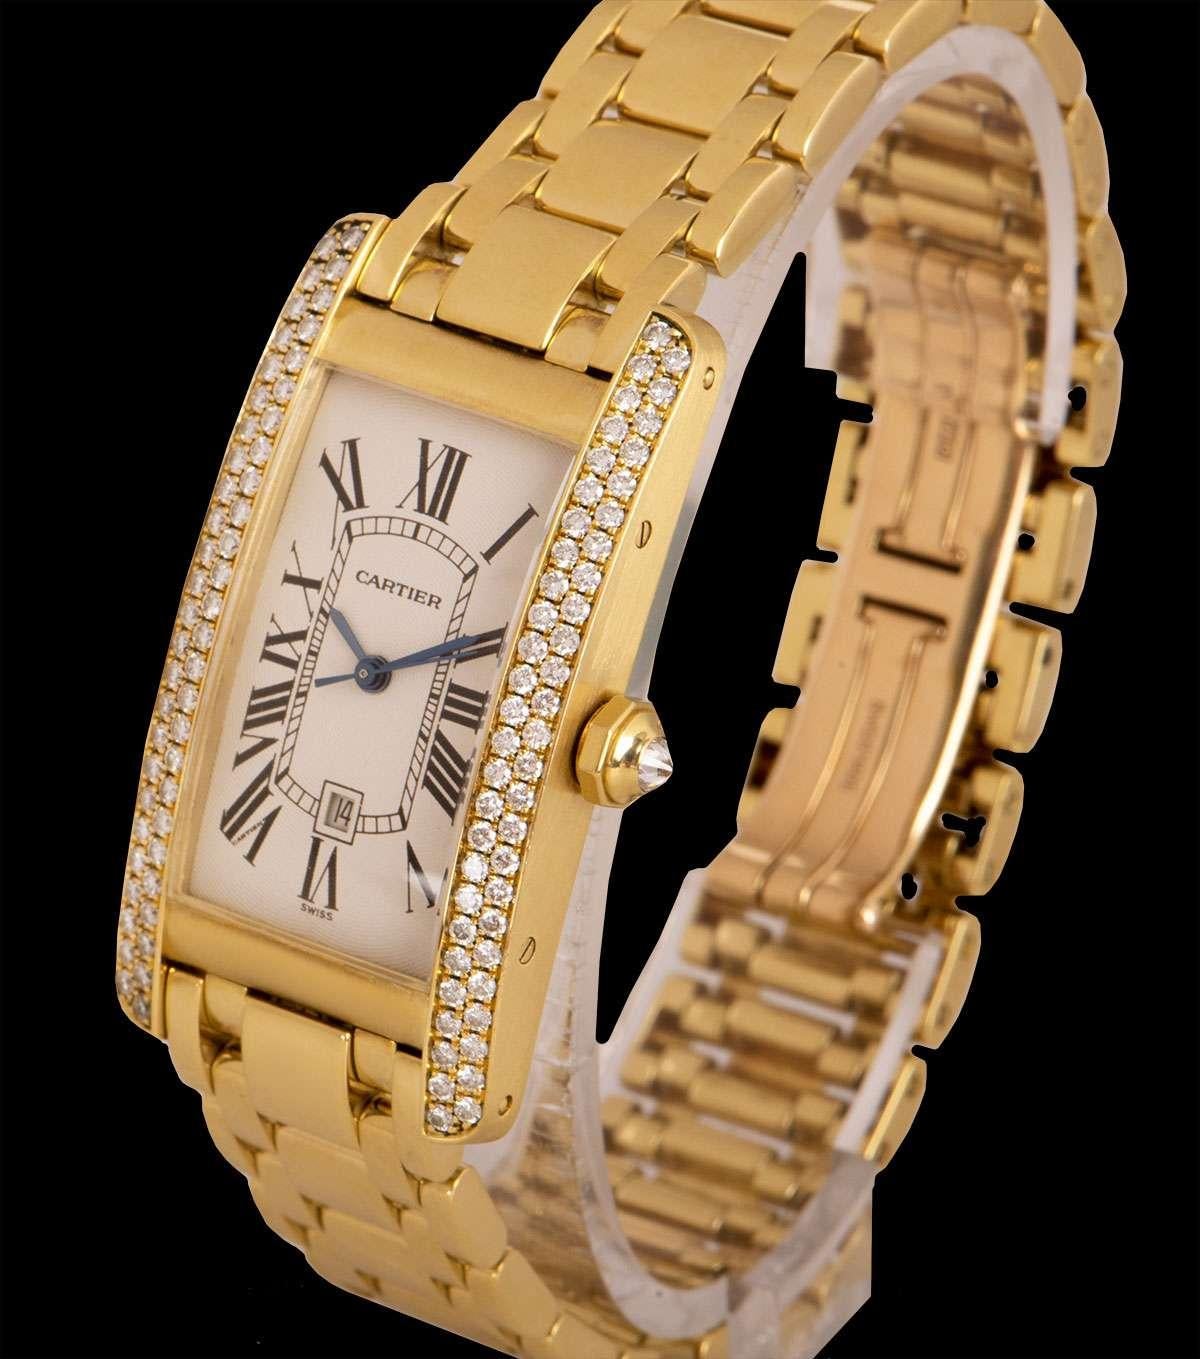 An 18k Yellow Gold Tank Americaine Mid-Size Wristwatch, silver guilloche dial with roman numerals and a secret signature at 